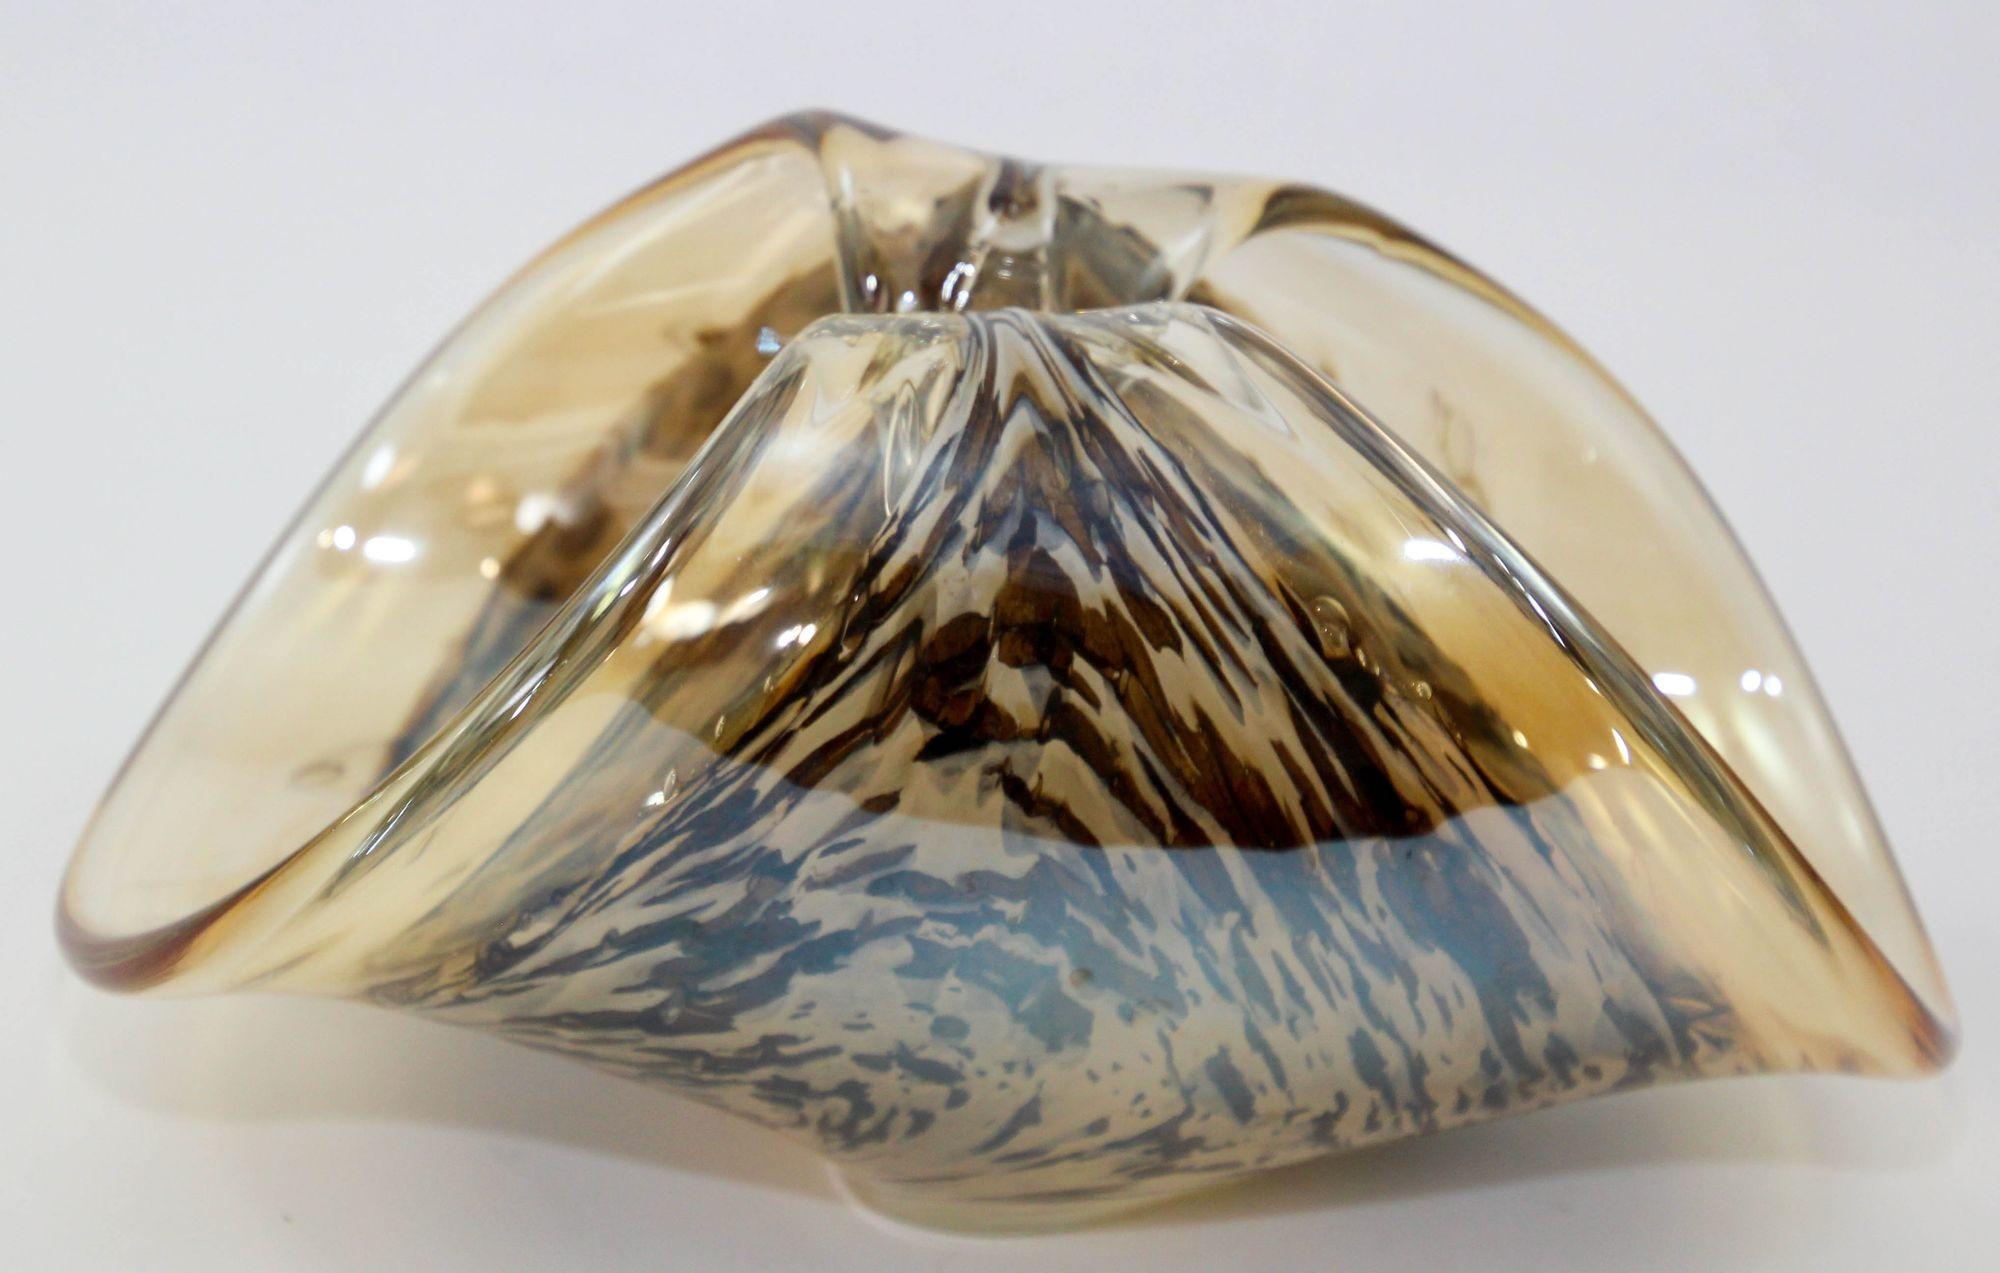 Gorgeous large brown and gold Murano Venetian hand blown art glass decorative bowl.
This stunning bowl is a true objet d'art and can be used to display candies or as a striking sculptural decoration.
Sculptural art glass organic form with beautiful